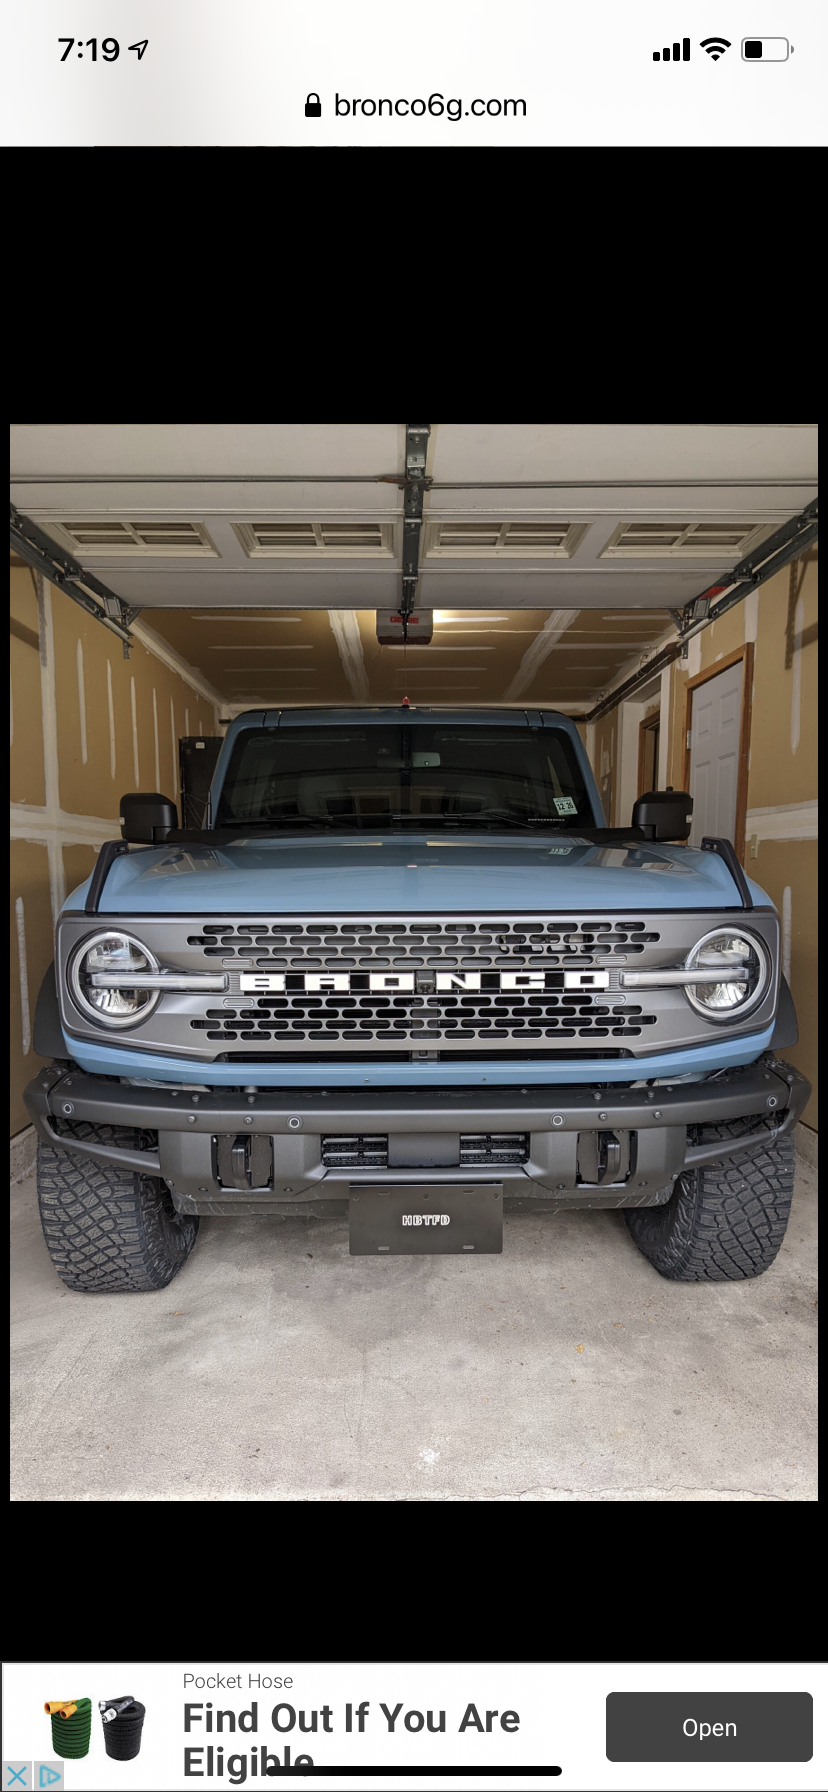 Ford Bronco Looking for a front plate holder for MOD bumper... C500B995-AB5C-4E90-8D8D-4B664A055E8F